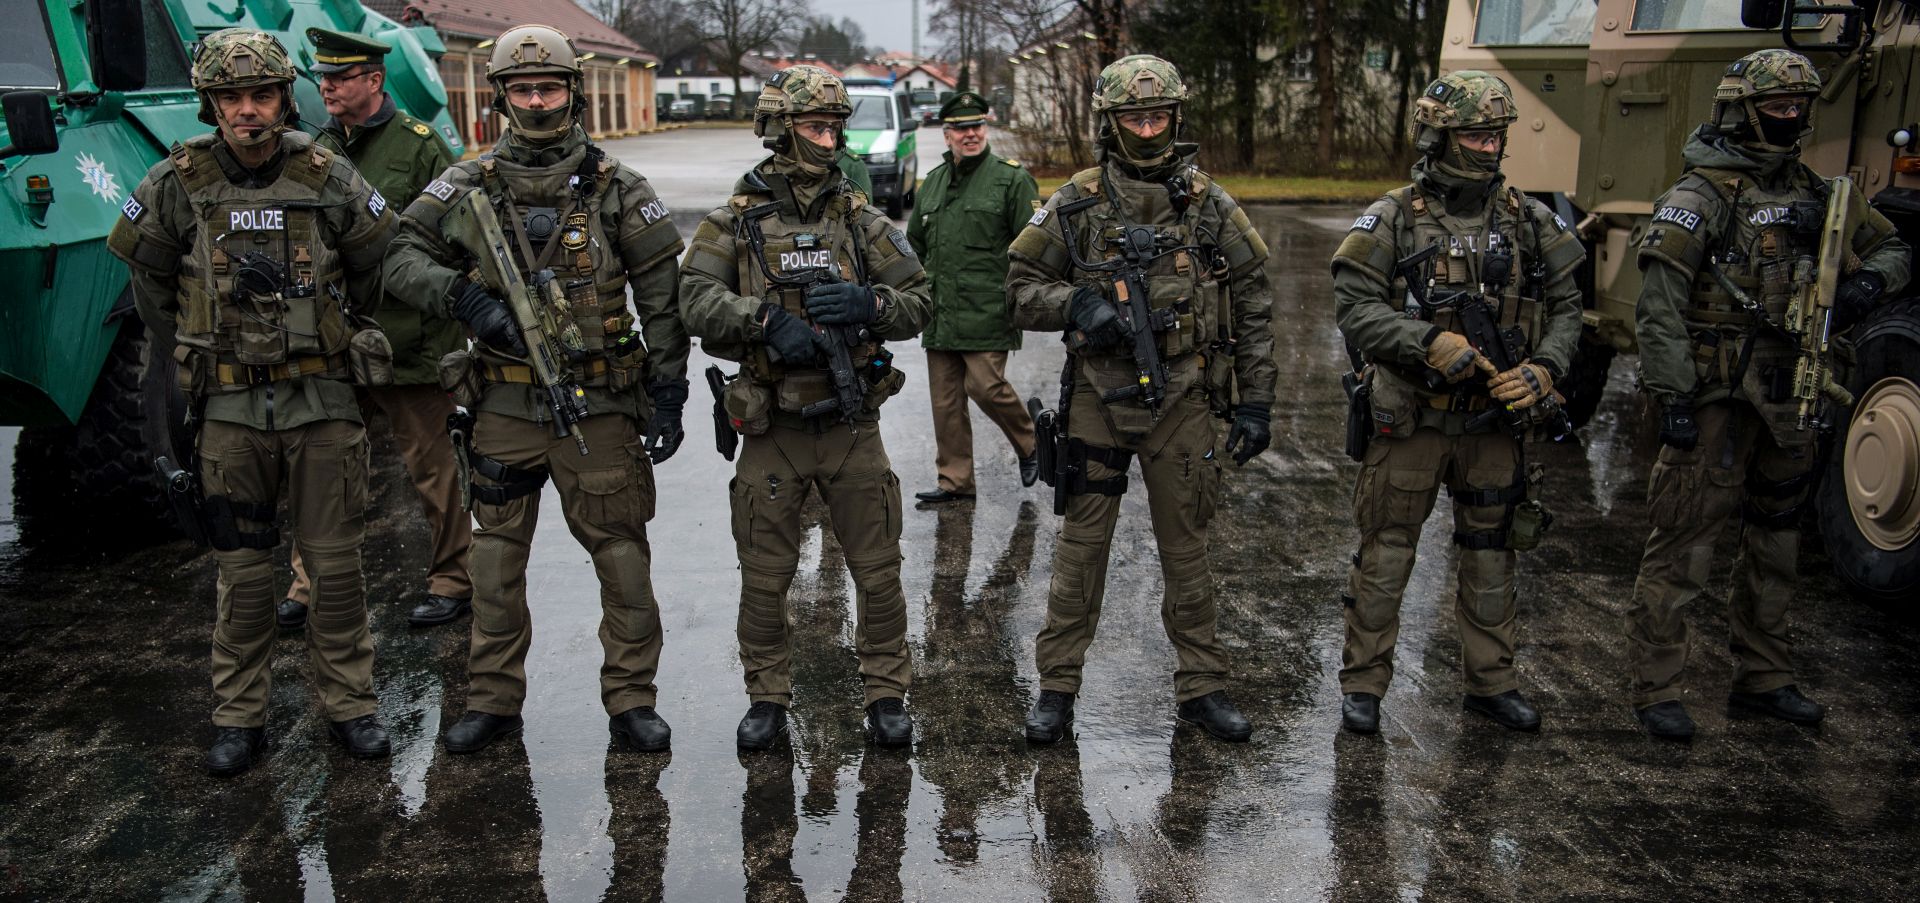 epa05838216 Officers of the German special police force SEK take part in the GETEX anti-terror-exercise in Murnau, Germany, 09 March 2017. GETEX ('Gemeinsame Terrorismusabwehr-Exercise') is the first exercise during which German police of six German Federal States and Military practice the coordination of forces during a simulated terrorist attack.  EPA/CHRISTIAN BRUNA